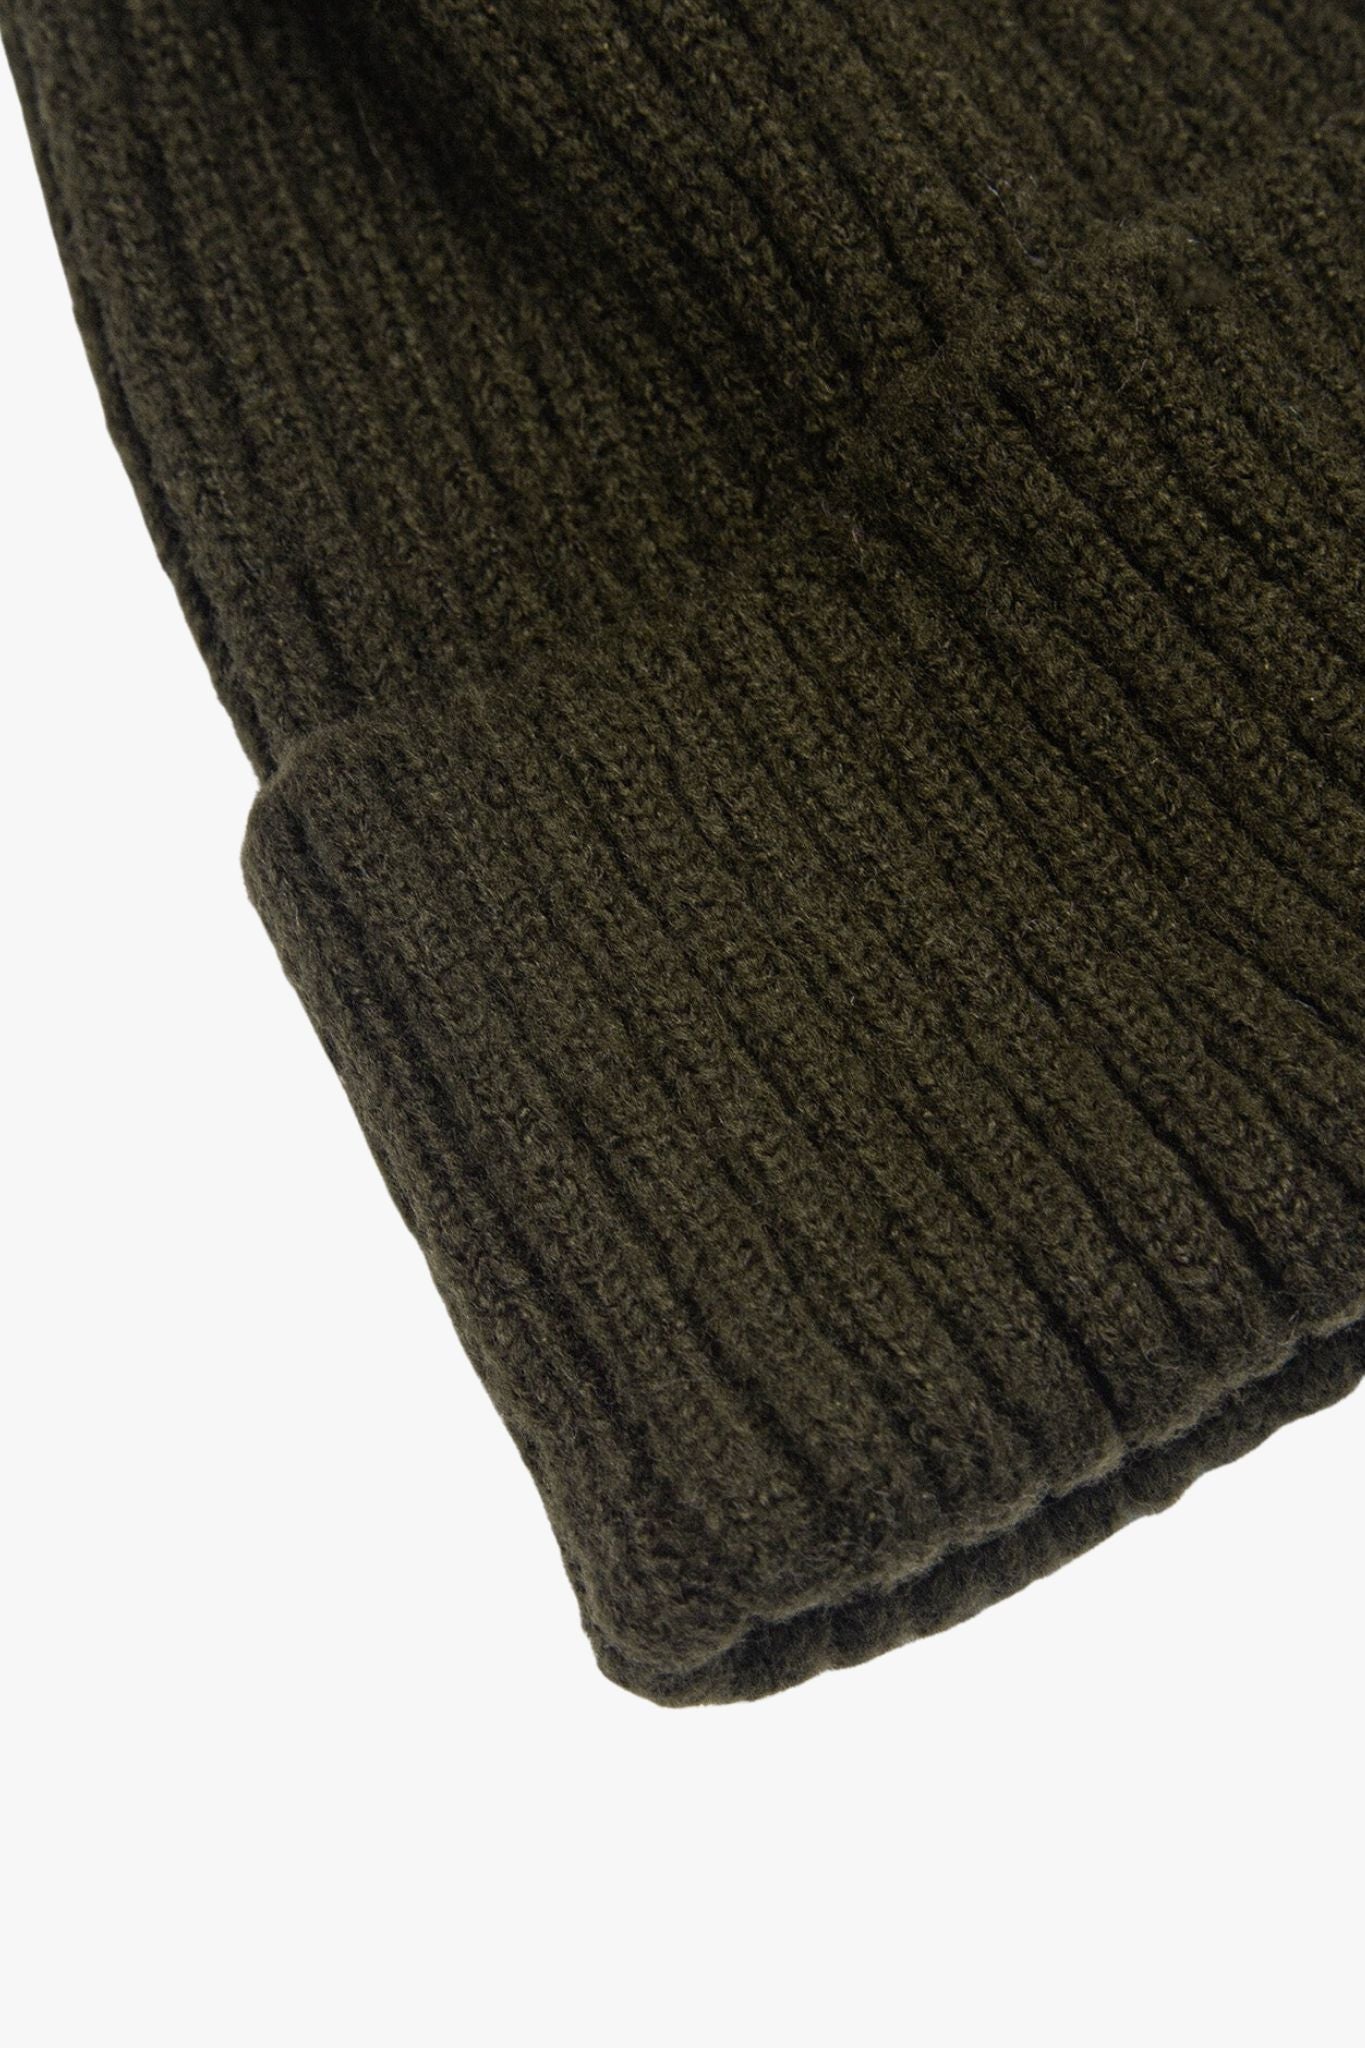 close up of the ribbed knitted pattern